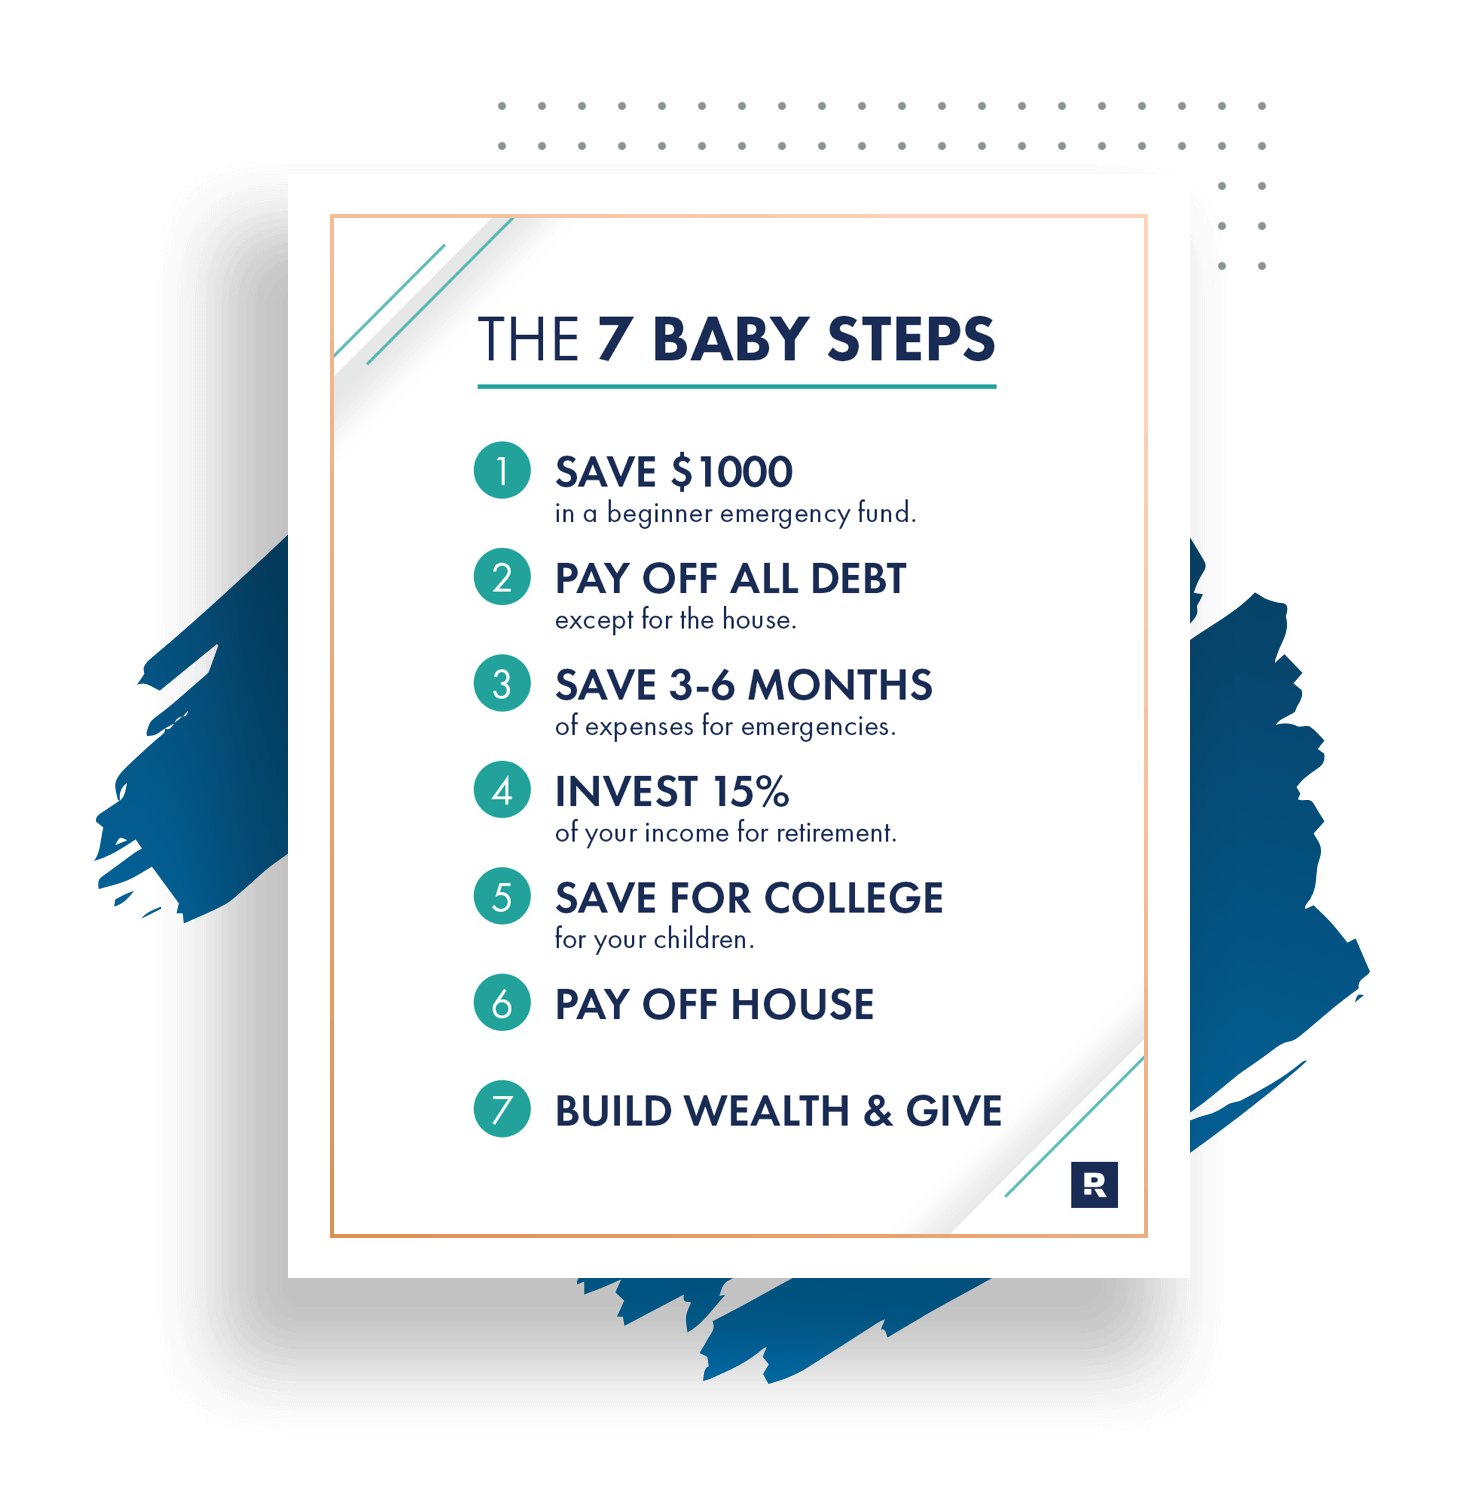 The 7 Baby Steps